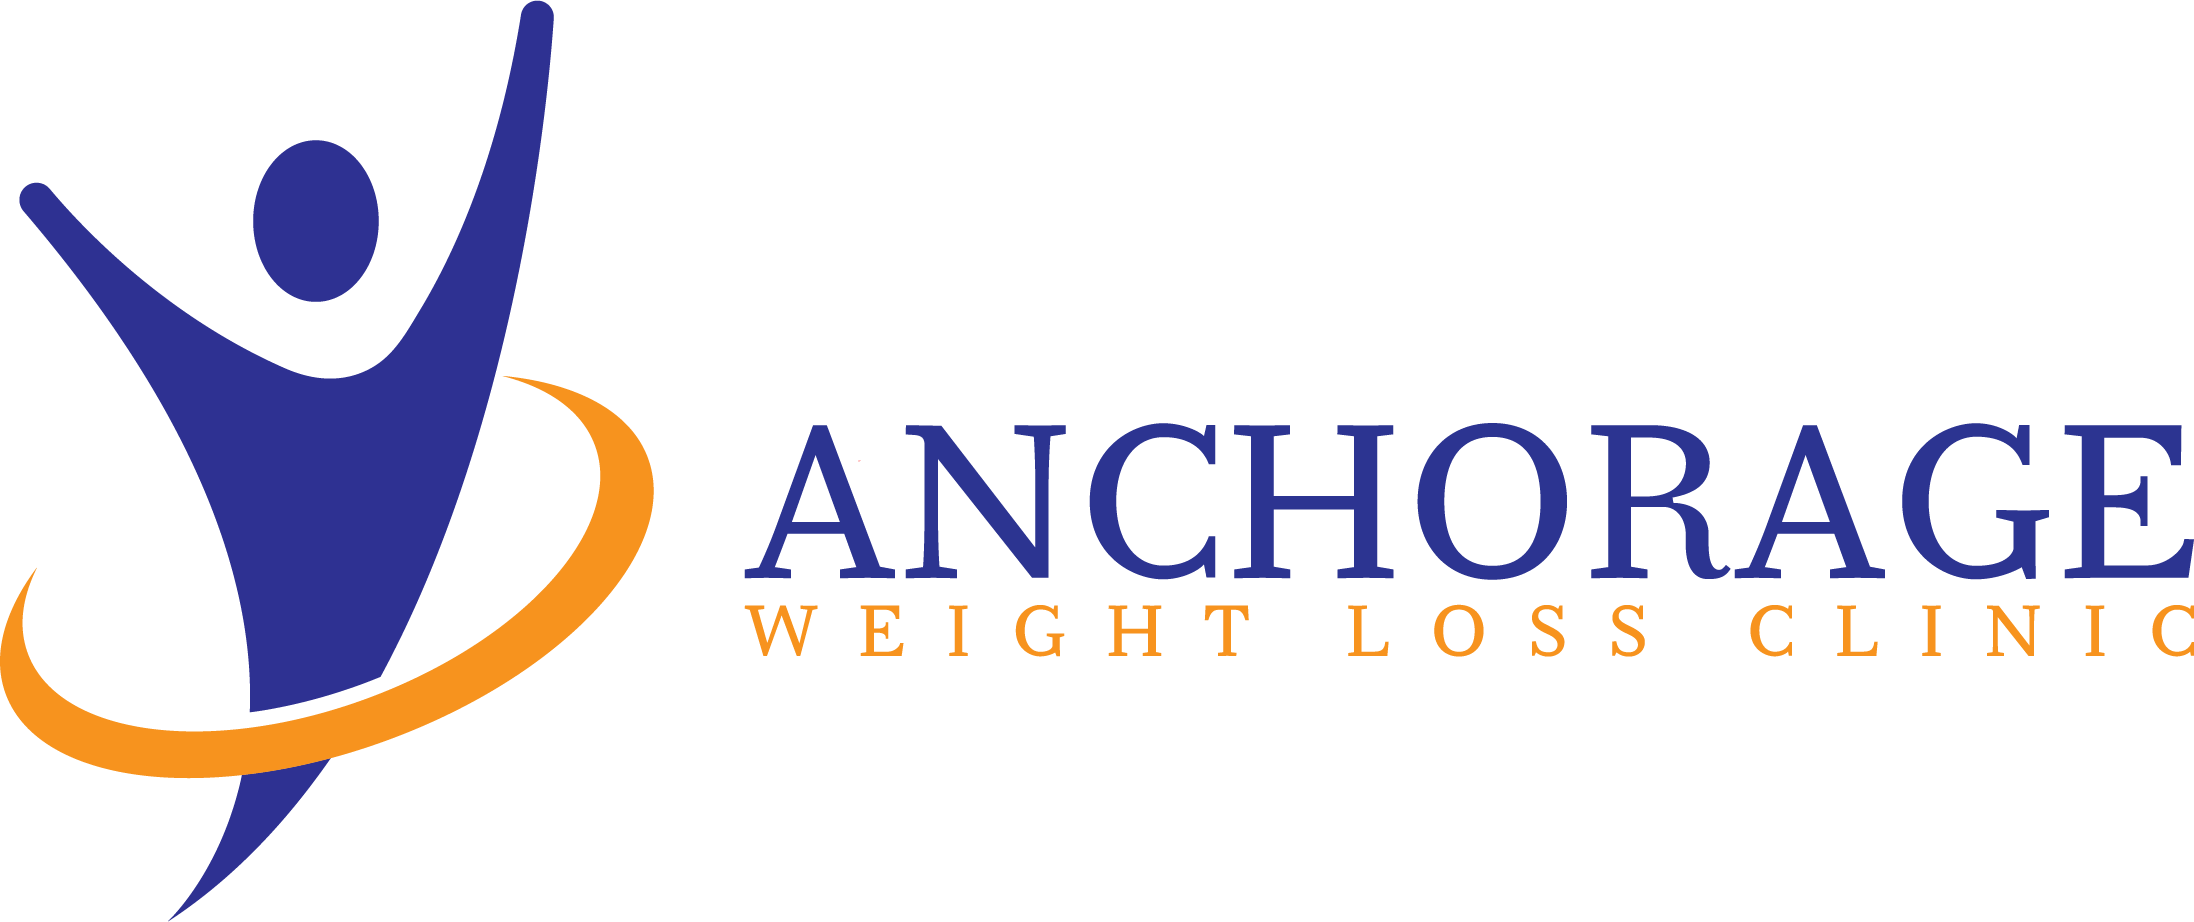 Anchorage Weight Loss Clinic